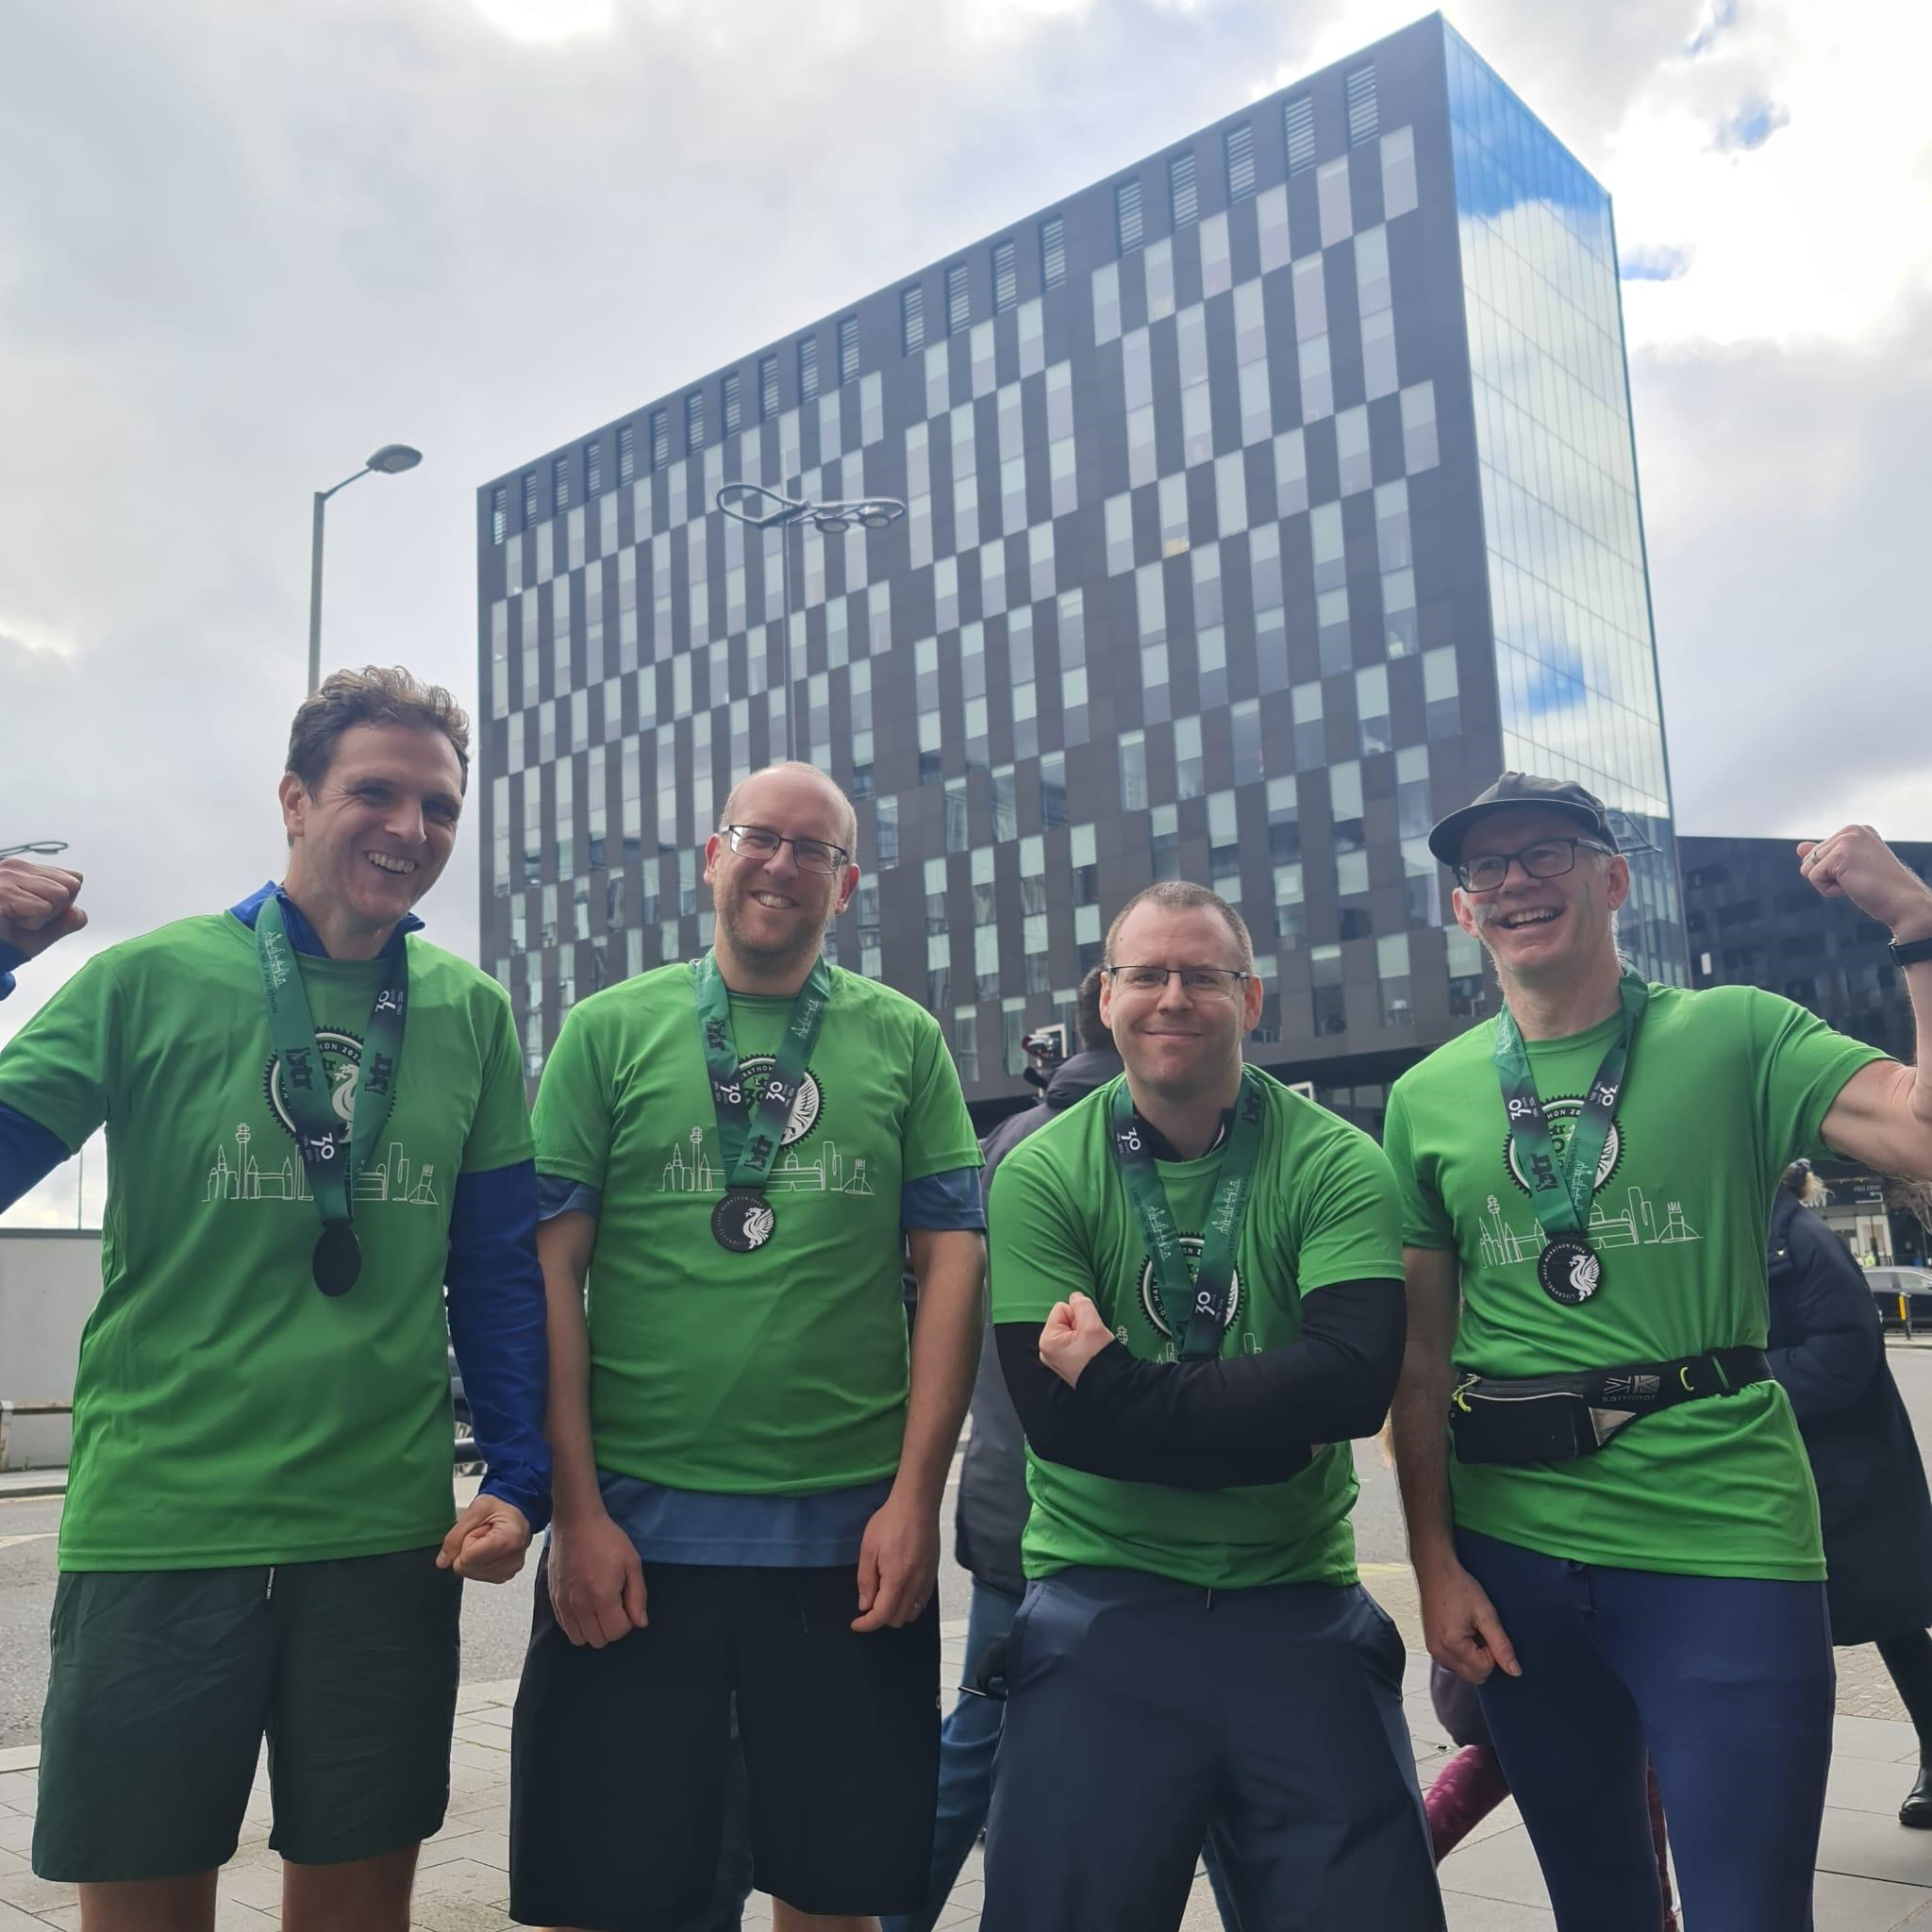 4 crowder employees with their medals after completing the half marathon